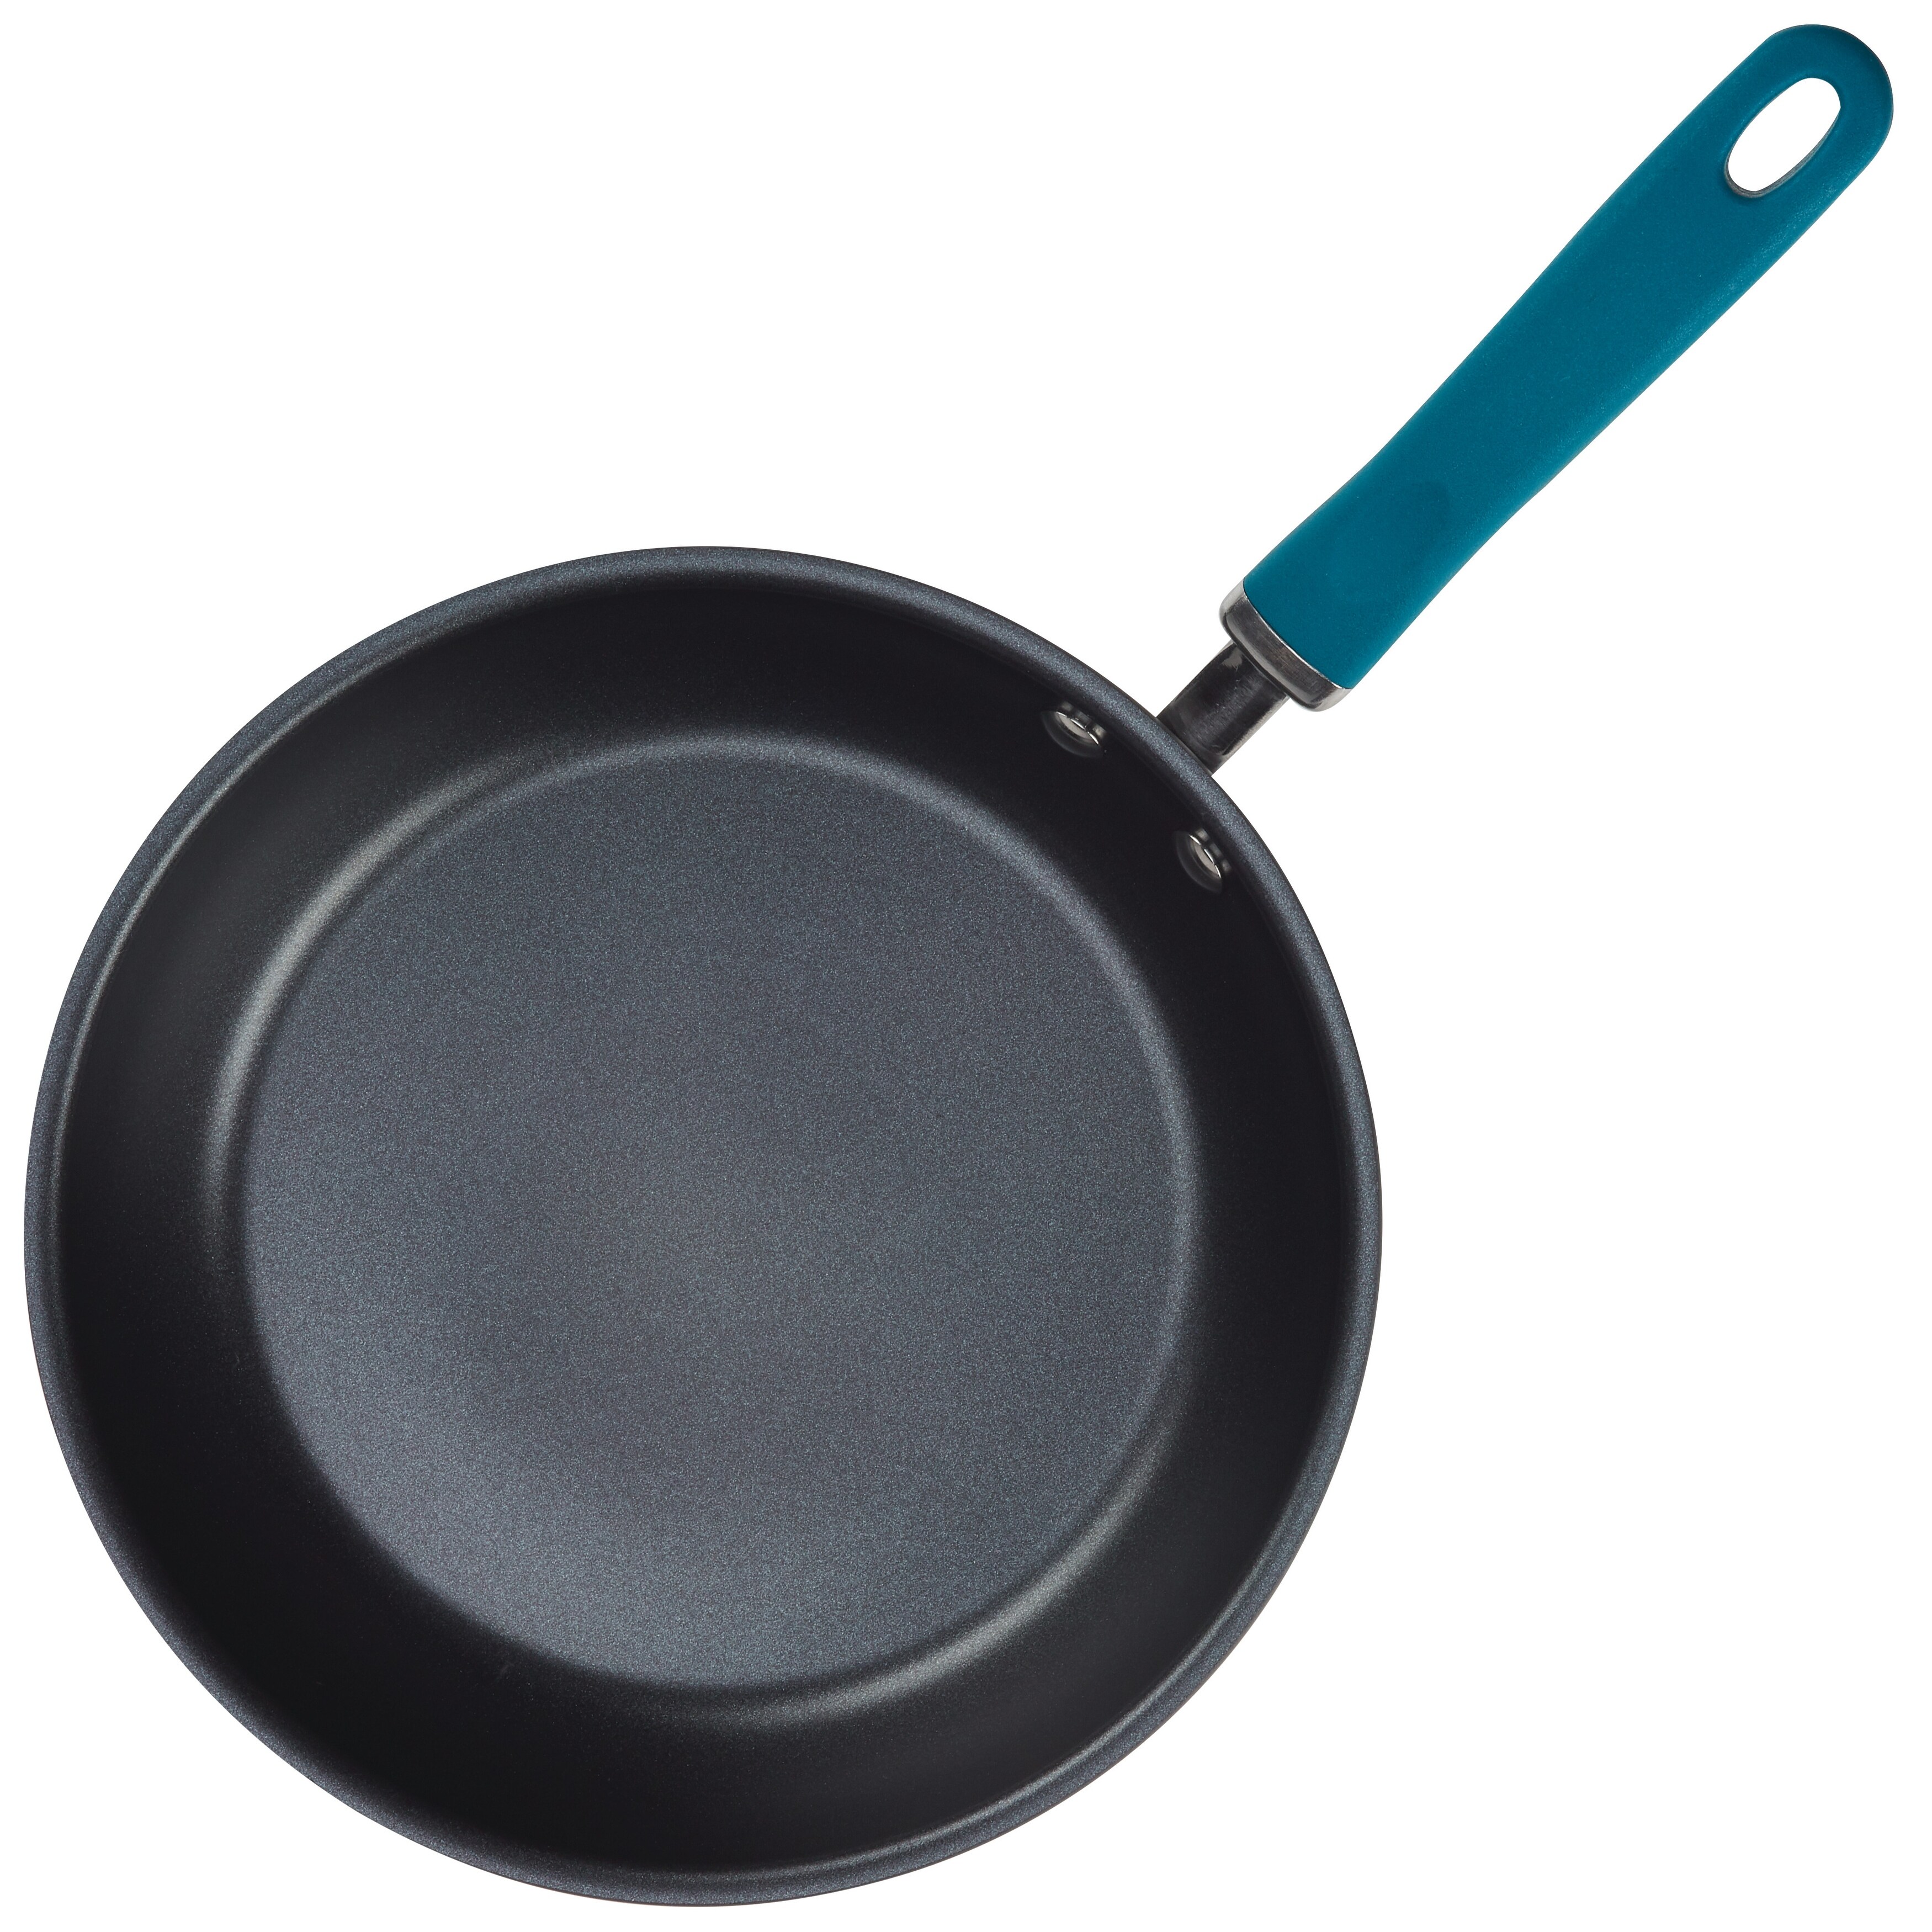 https://ak1.ostkcdn.com/images/products/is/images/direct/cf964fff15131a7eb609d7f28f015122aa552b36/Rachael-Ray-Create-Delicious-Hard-Anodized-Aluminum-Nonstick-Cookware-Induction-Pots-and-Pans-Set%2C-11-Piece.jpg